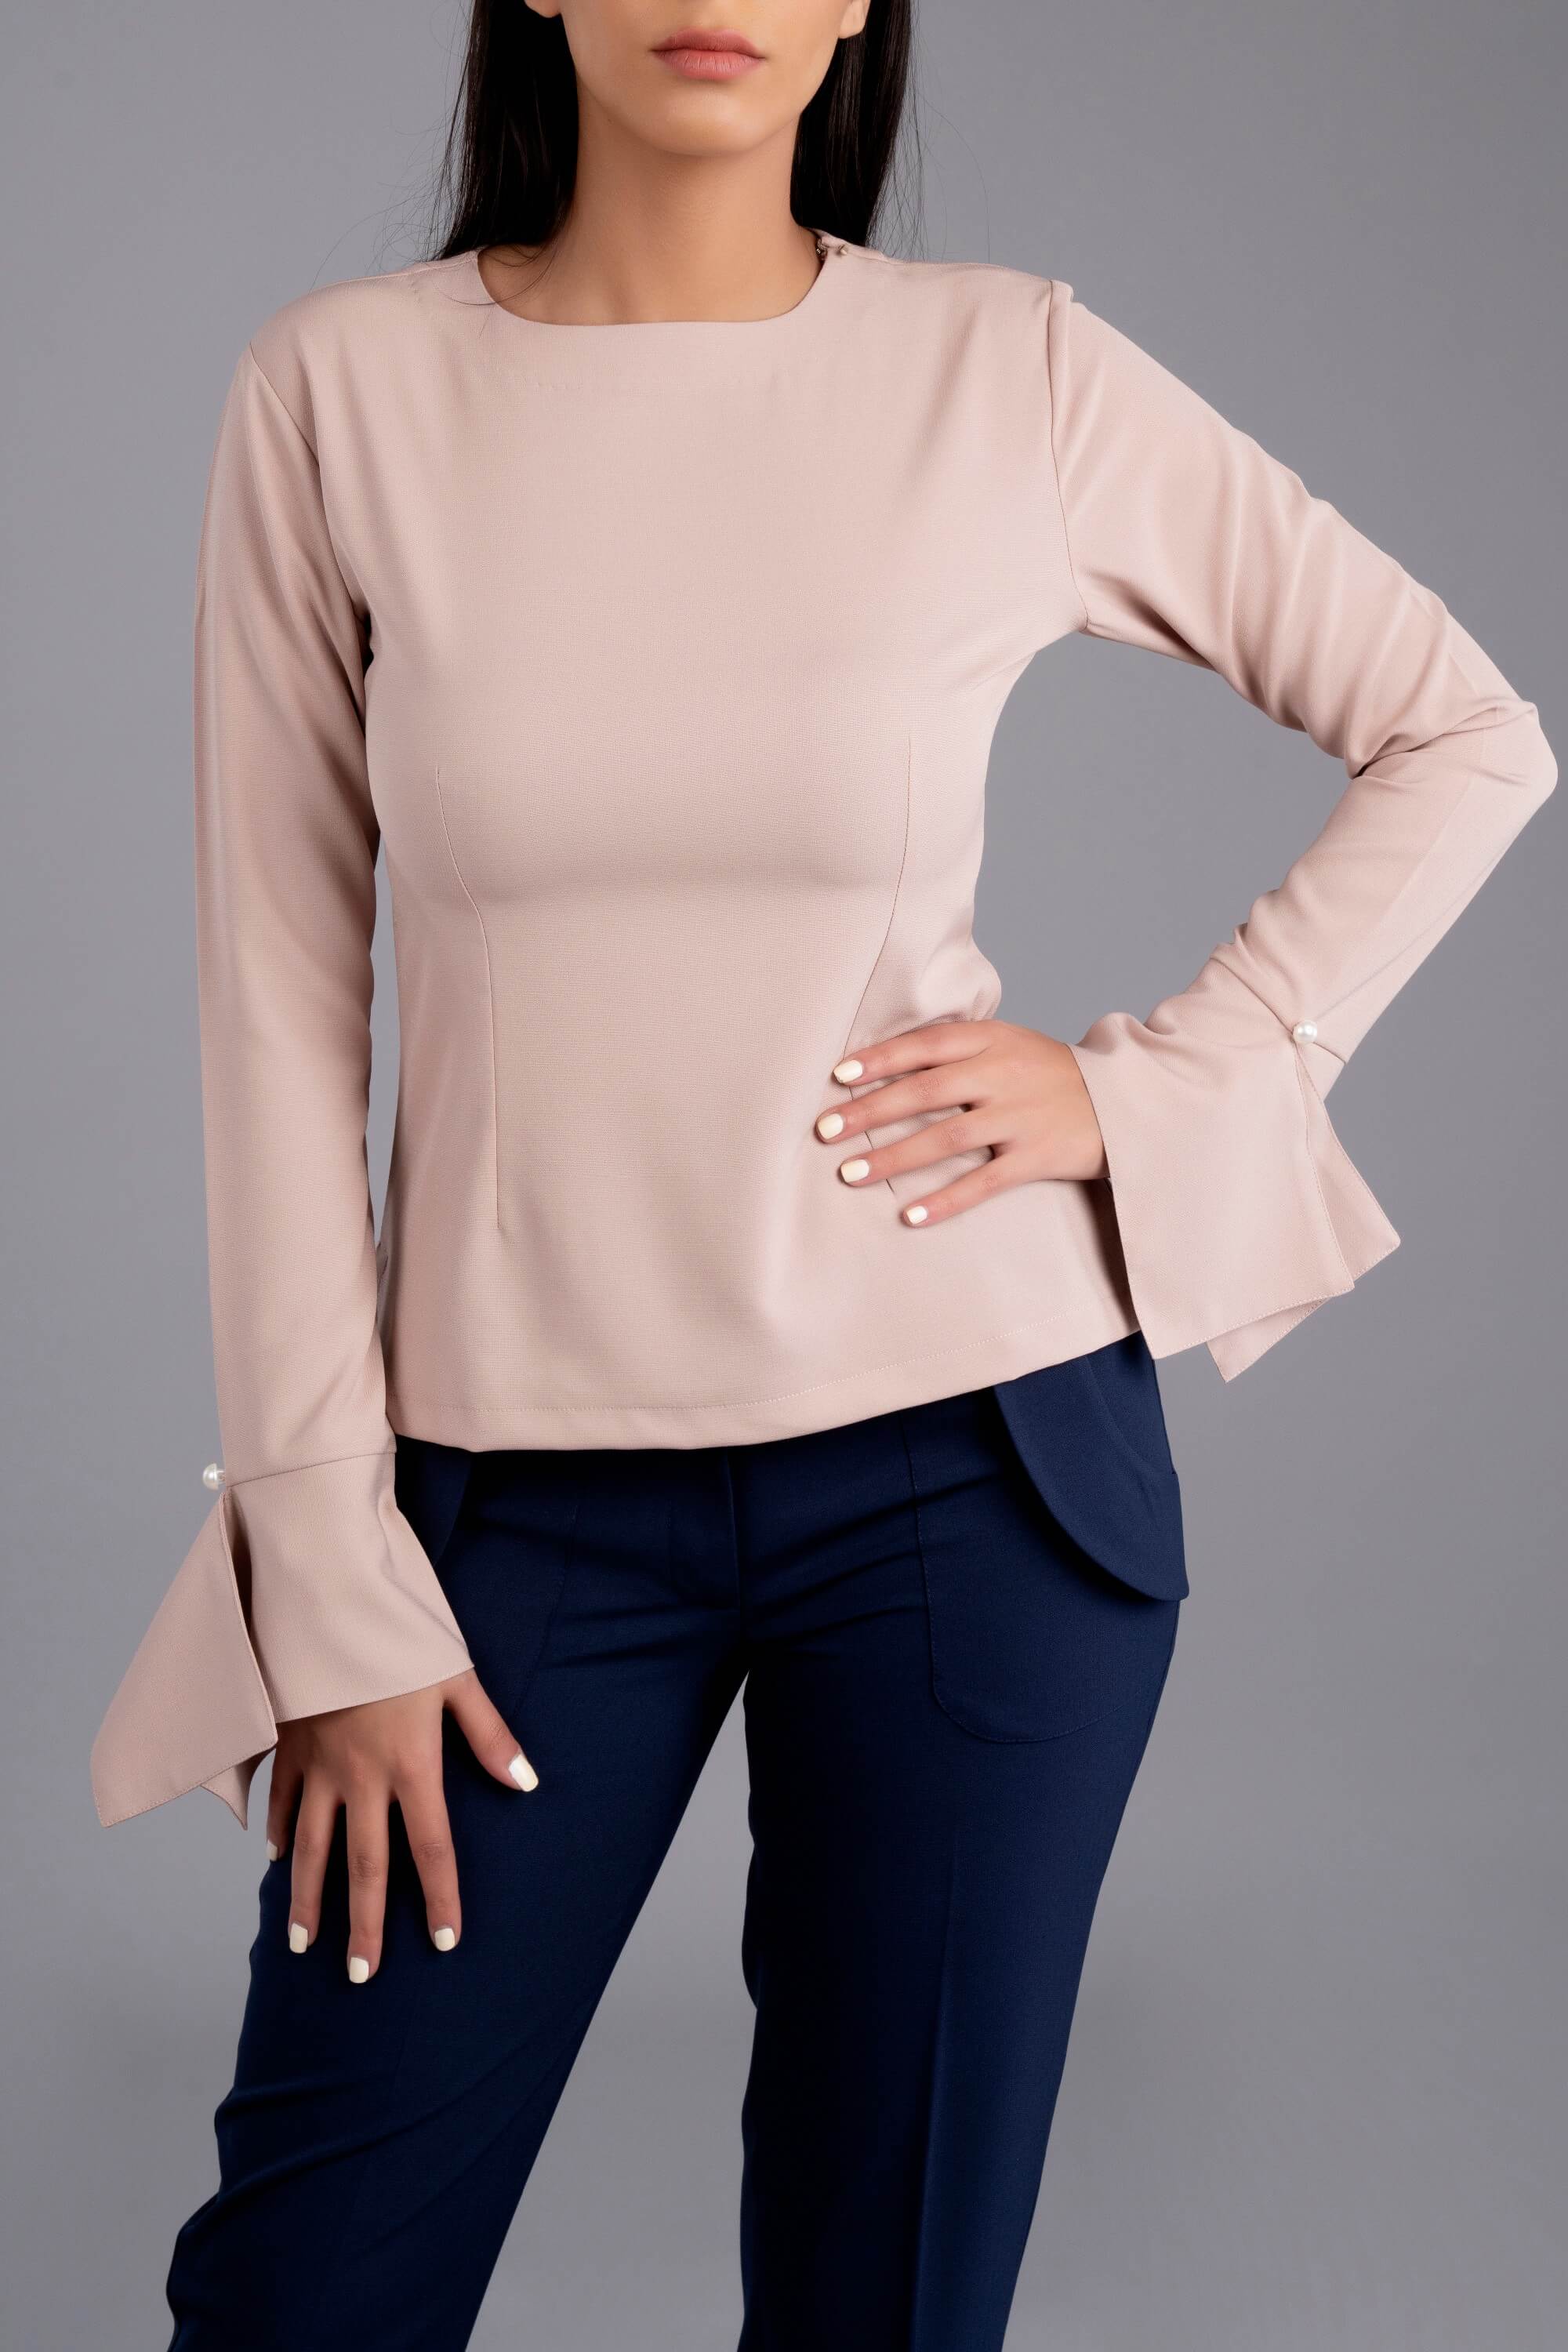 Casela Long Sleeve Blouse Slitted Cuff with Pearl Button-Beige - The Modernest